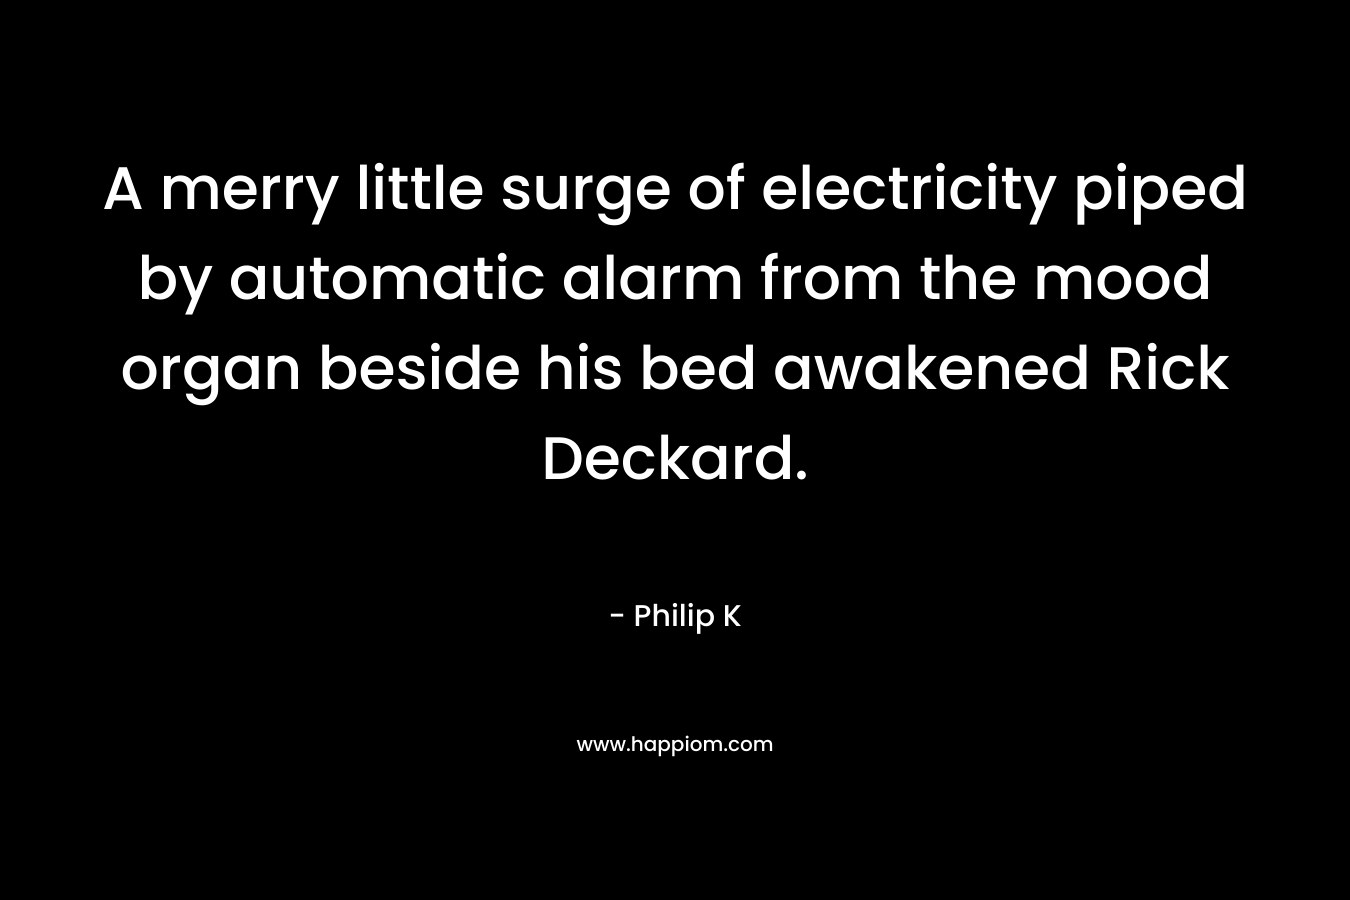 A merry little surge of electricity piped by automatic alarm from the mood organ beside his bed awakened Rick Deckard. – Philip K